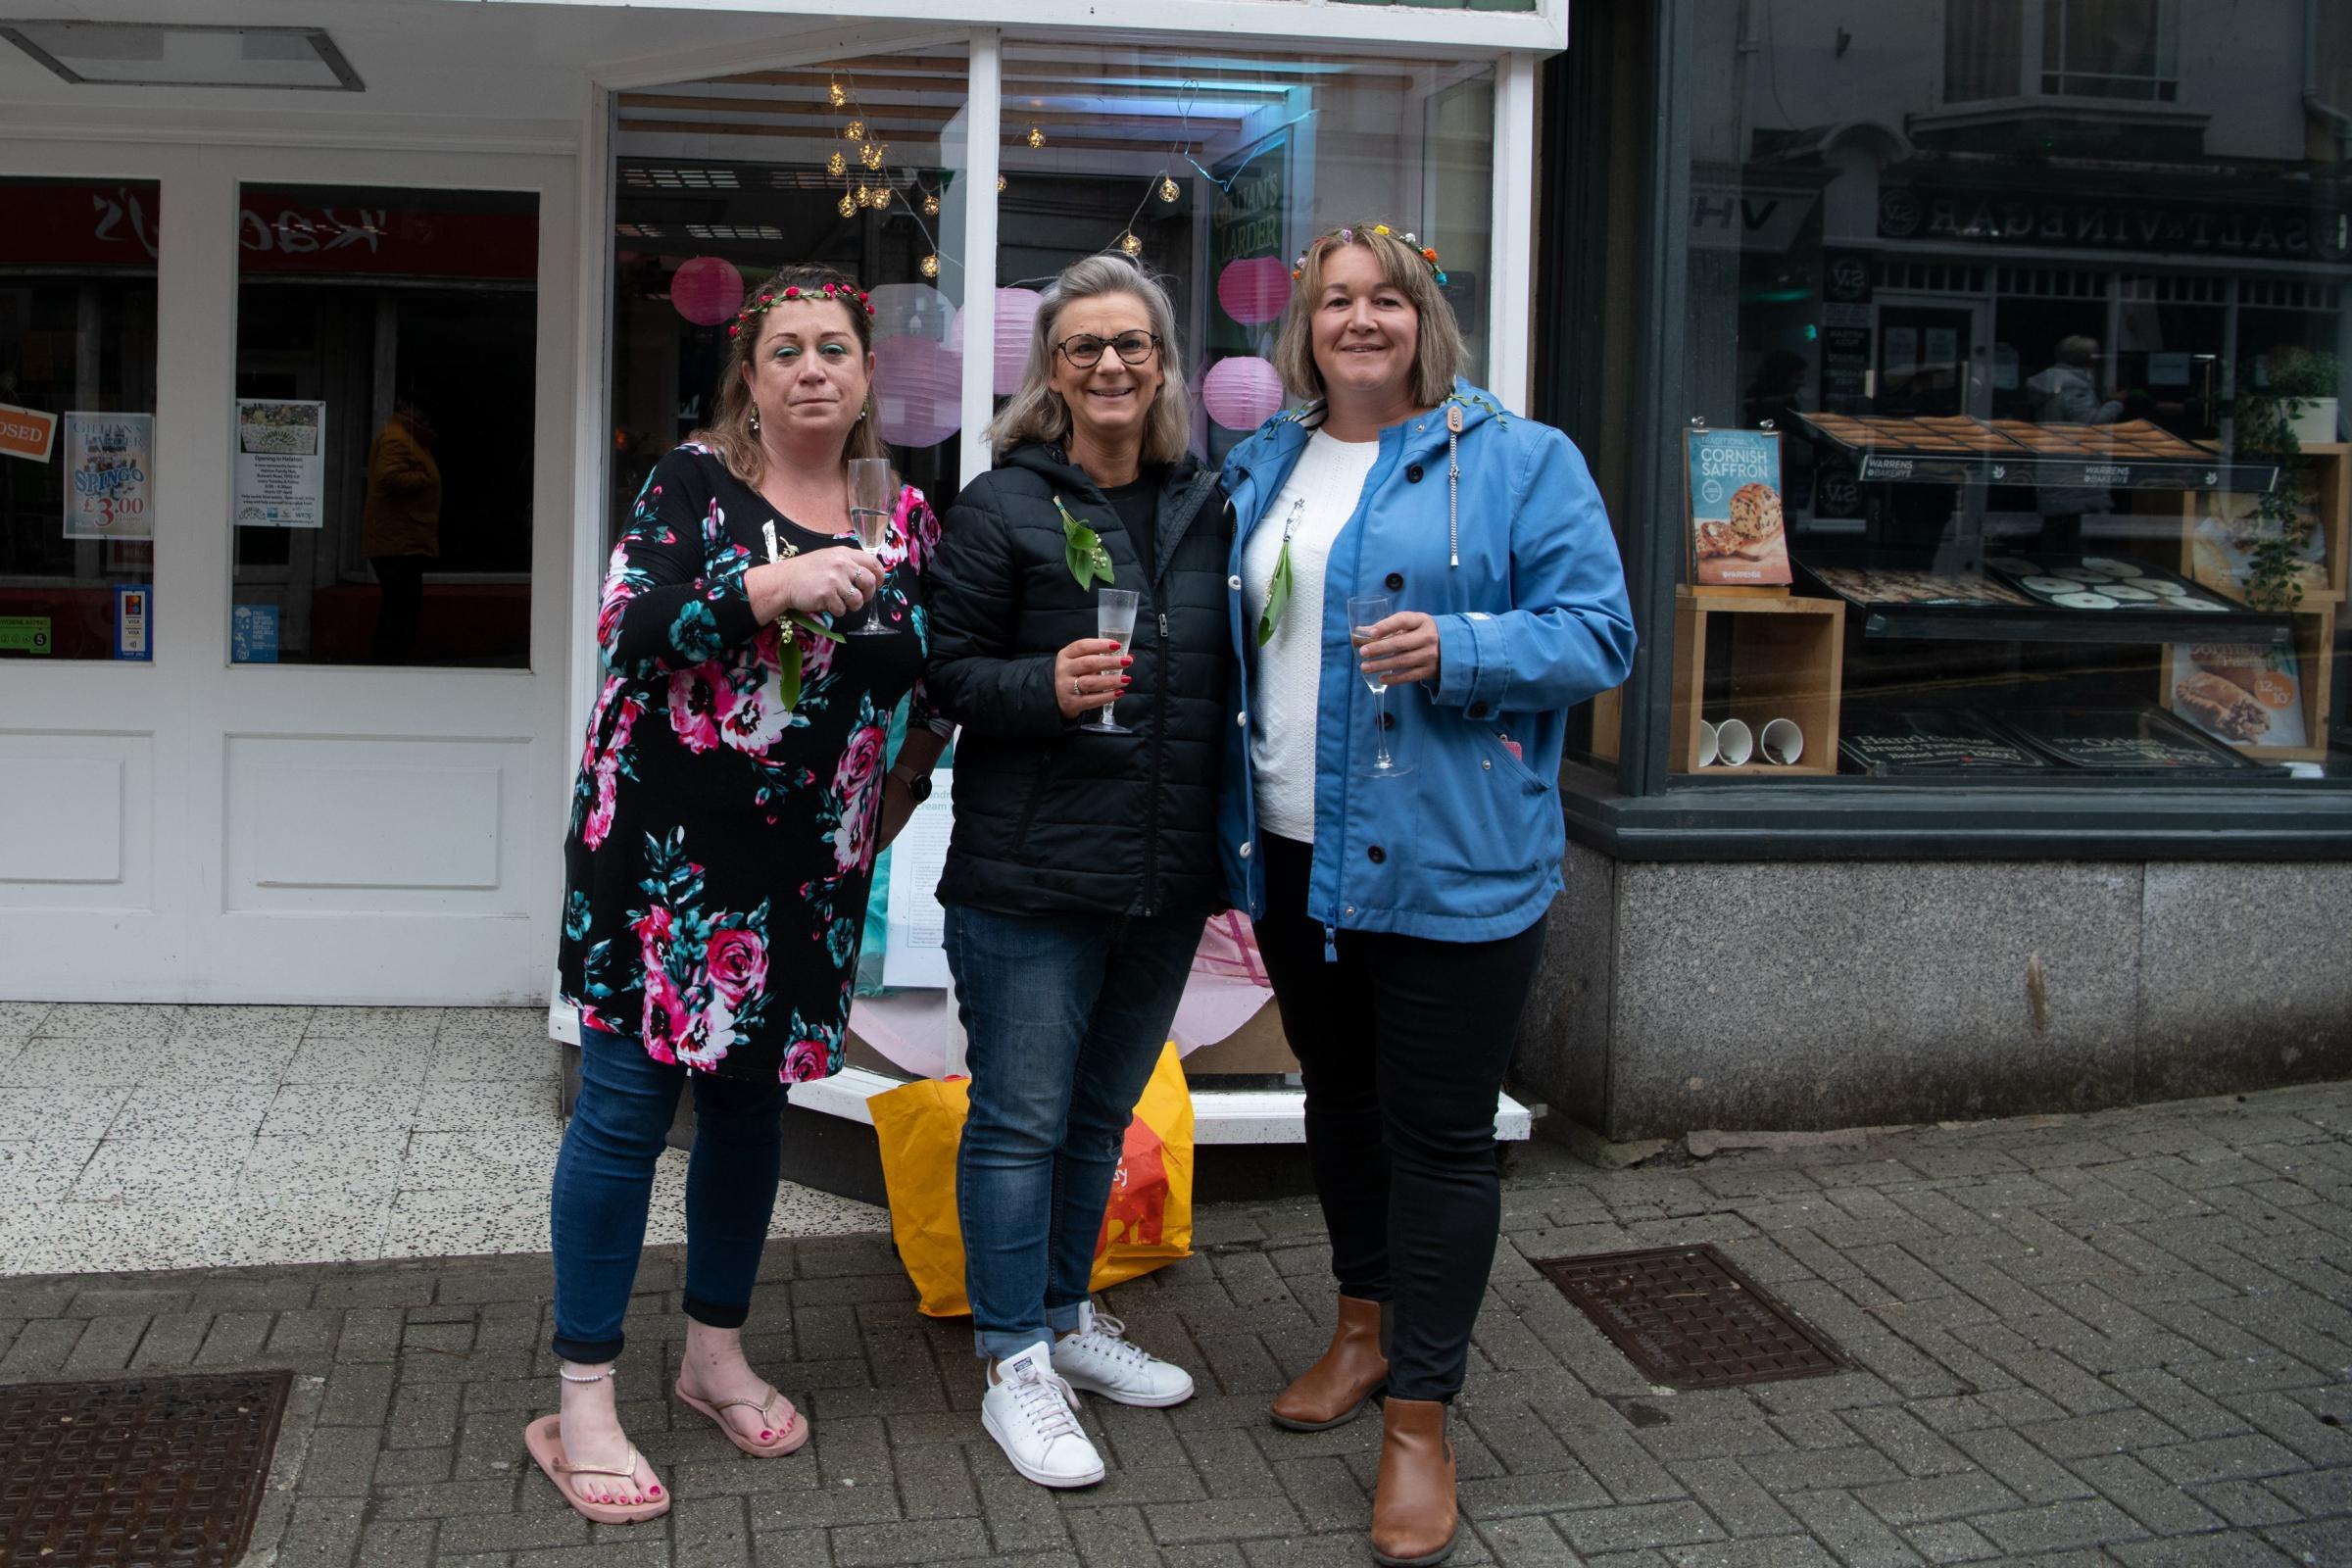 Lisa De Bargeton, Clare OHare and Julie Veneer Beard met as a trio in town to enjoy a drink together. Picture: Kathy White